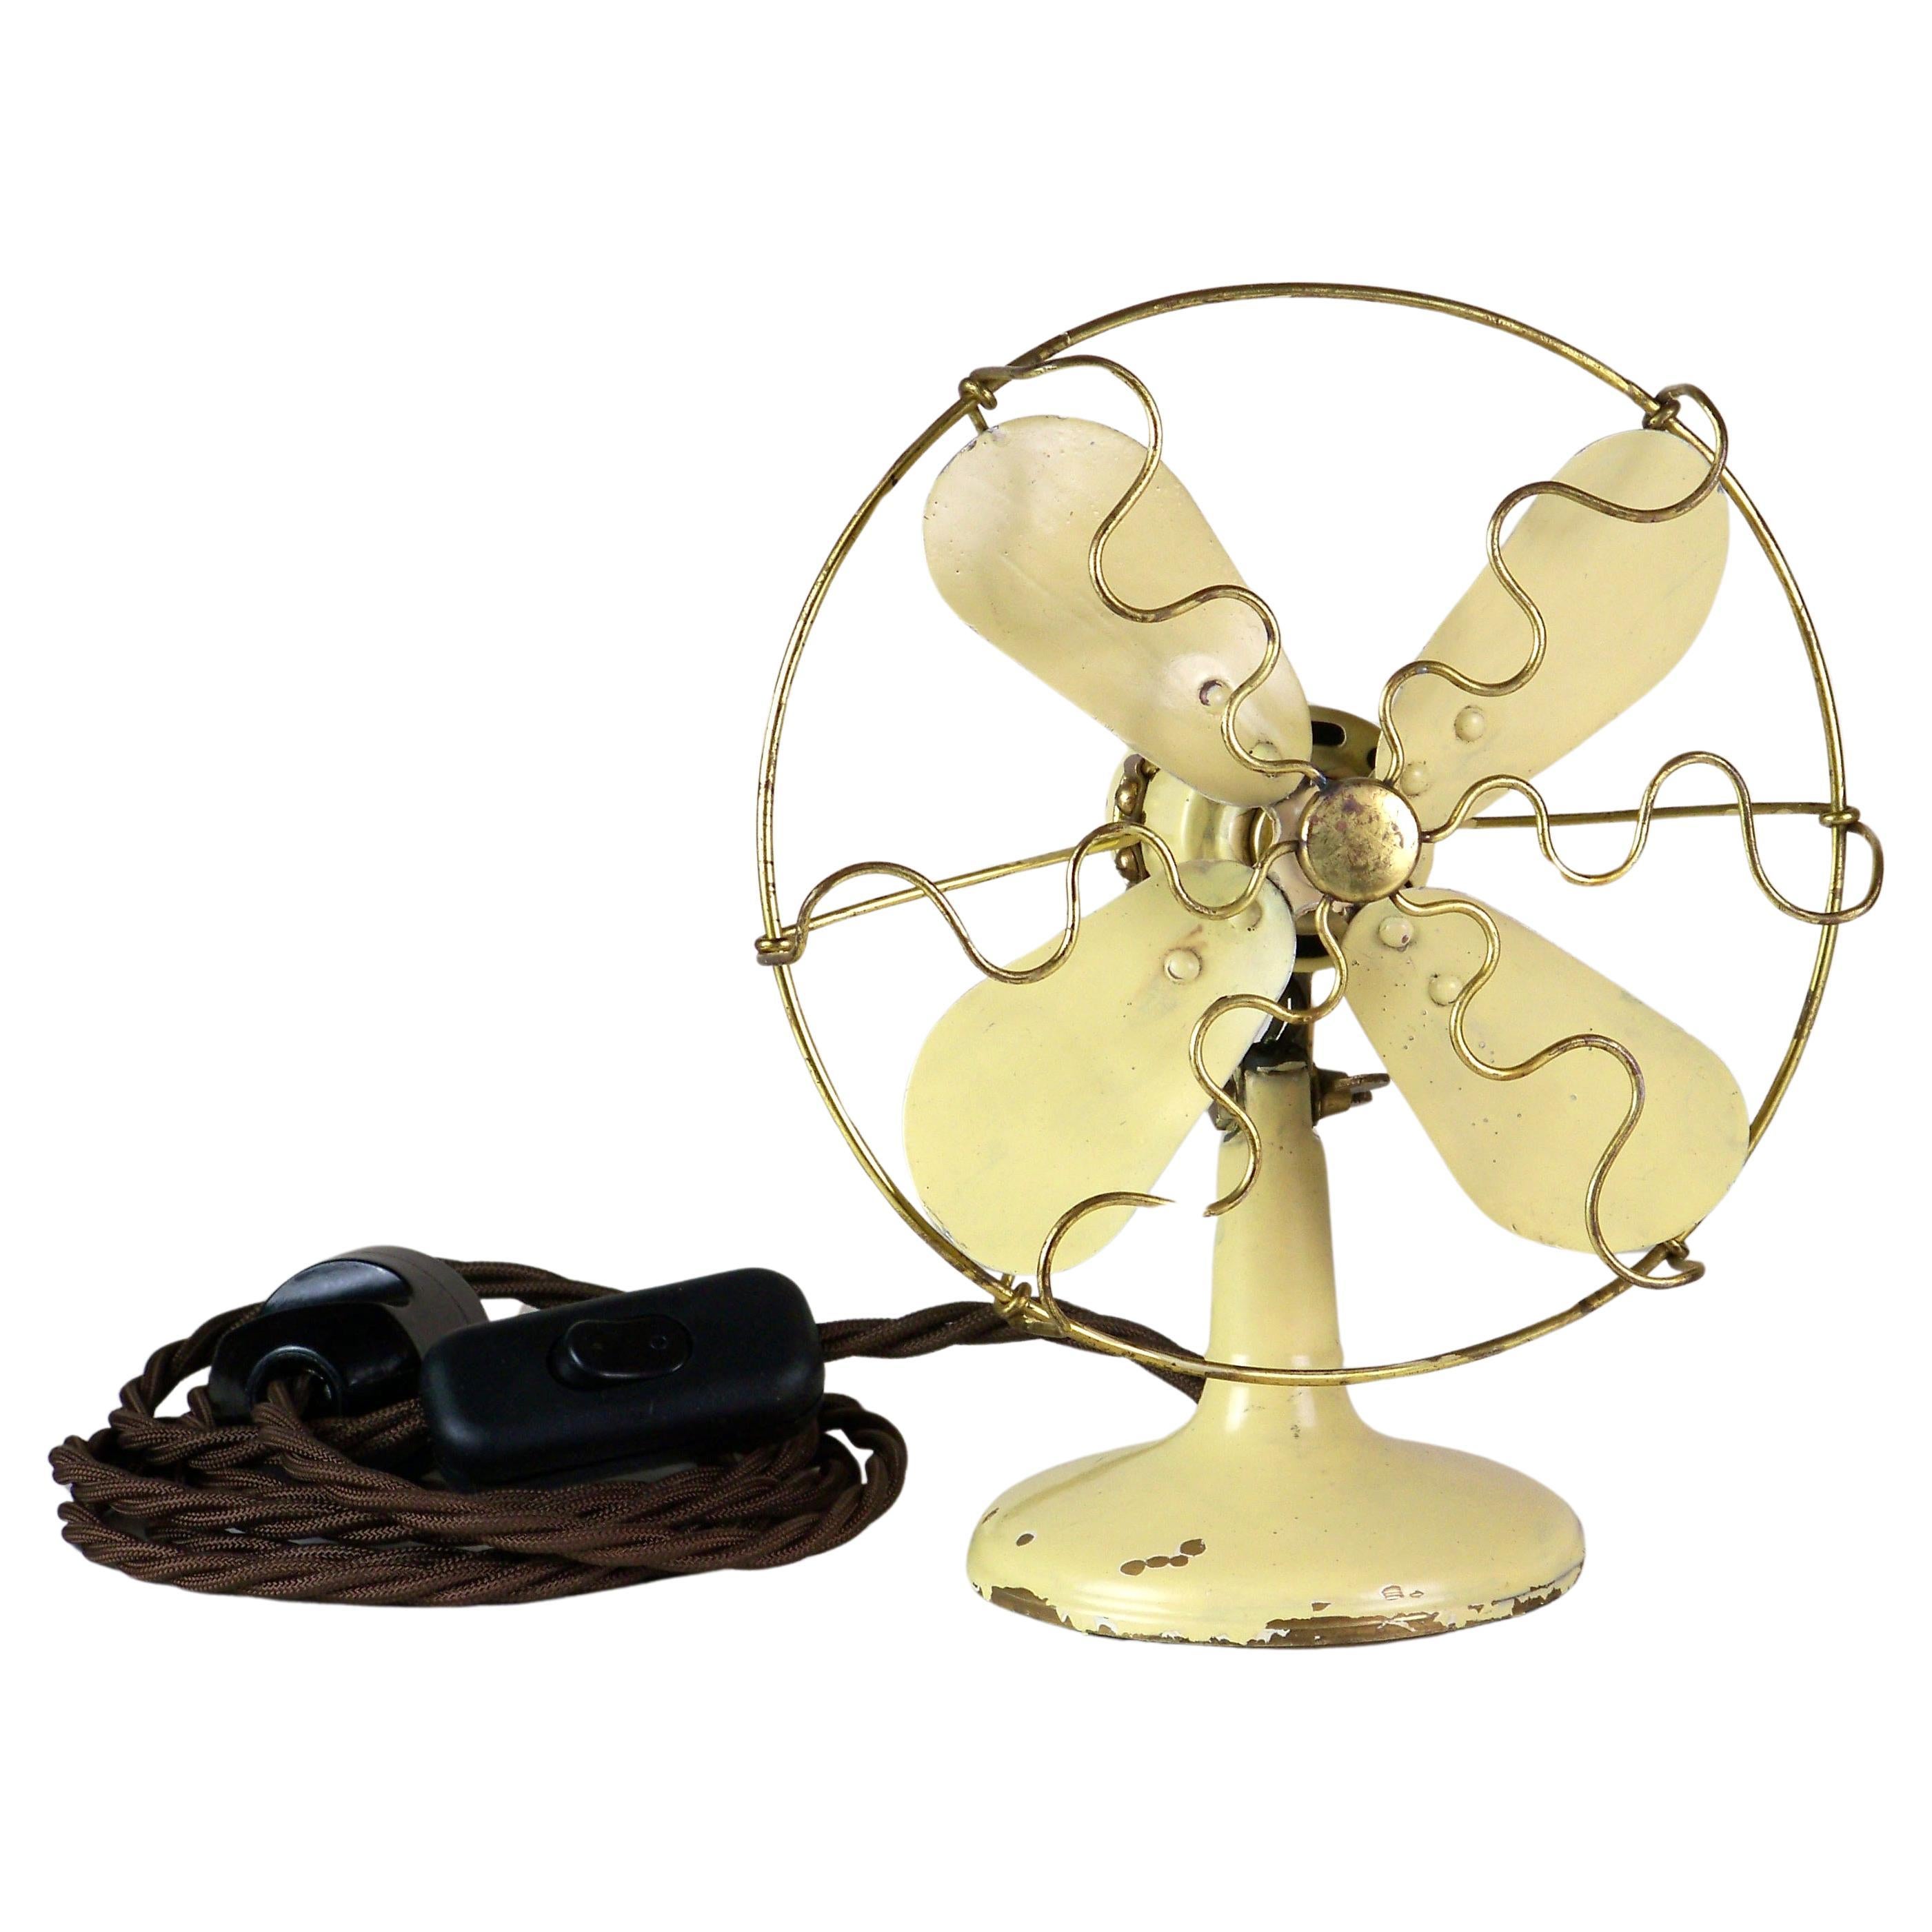 Small Table fan SIEMENS, 220V - 1940s  For Sale